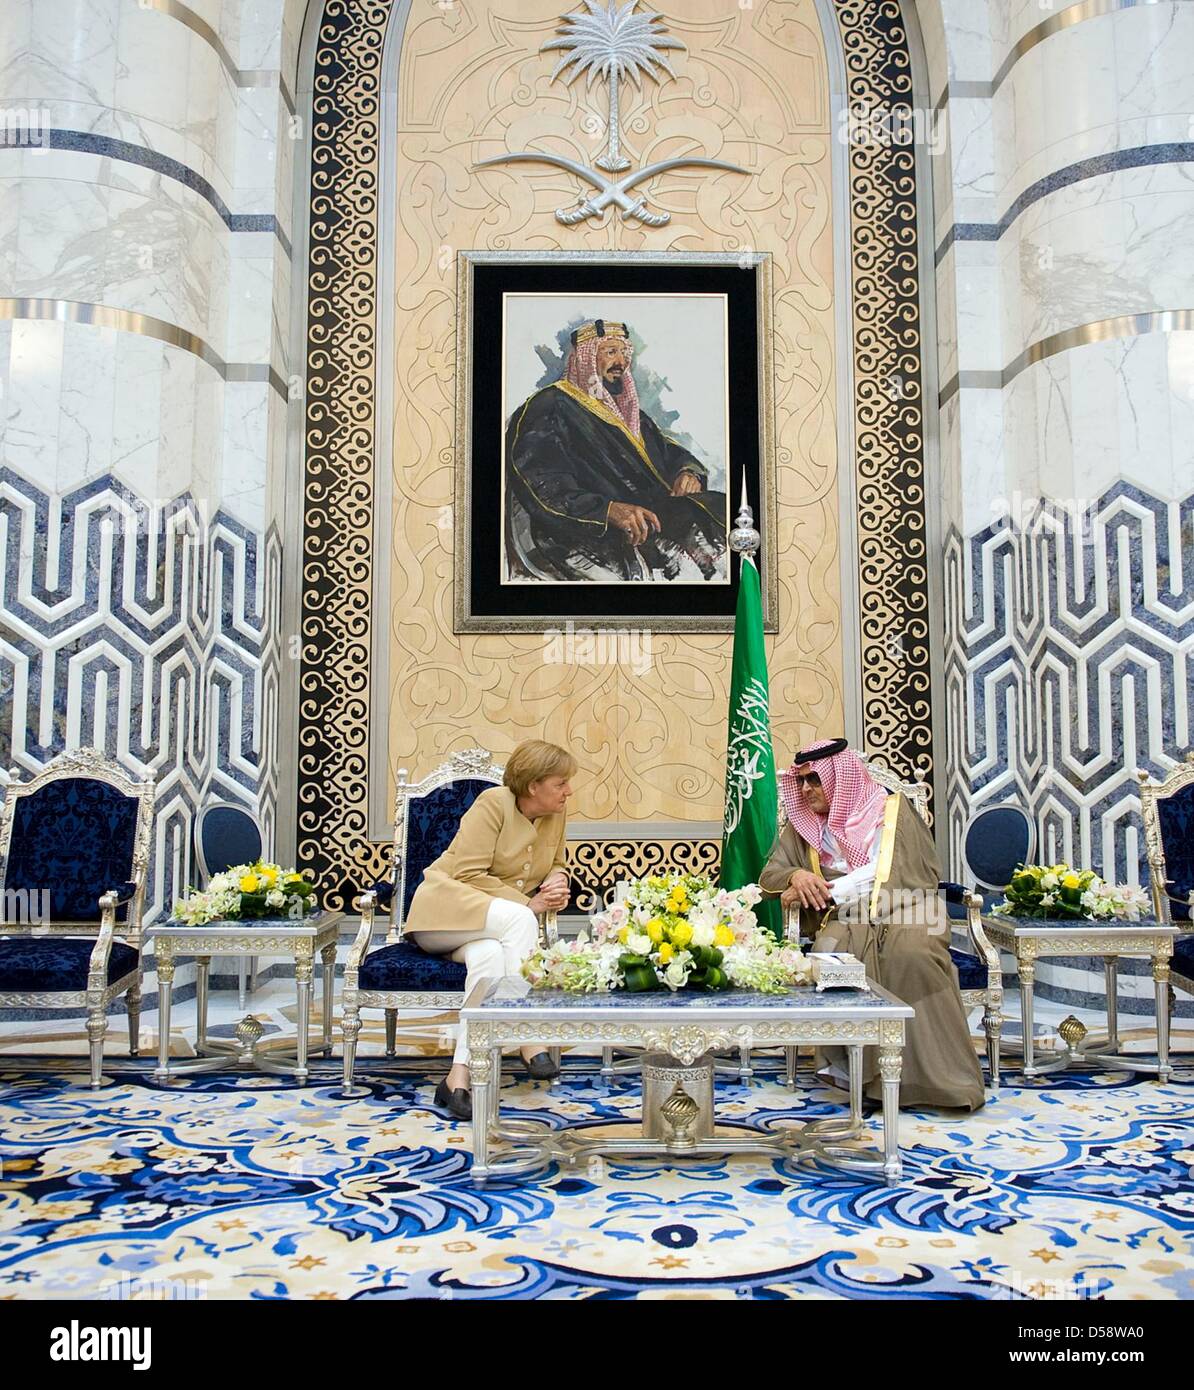 German Chancellor Angela Merkel talks with Saudi Arabia's Foreign Minister Prince Saud Al Faisal bin Abdulaziz Al Saud at airport in Jeddah, Saudi Arabia, 25 May 2010. On the motive in the backround is founder king Abdulaziz Al Saud. Merkel will visit four of six Gulf Cooperation Council countries until 27 May 2010 to improve economic and political ties. Photo: BUNDESREGIERUNG / BE Stock Photo